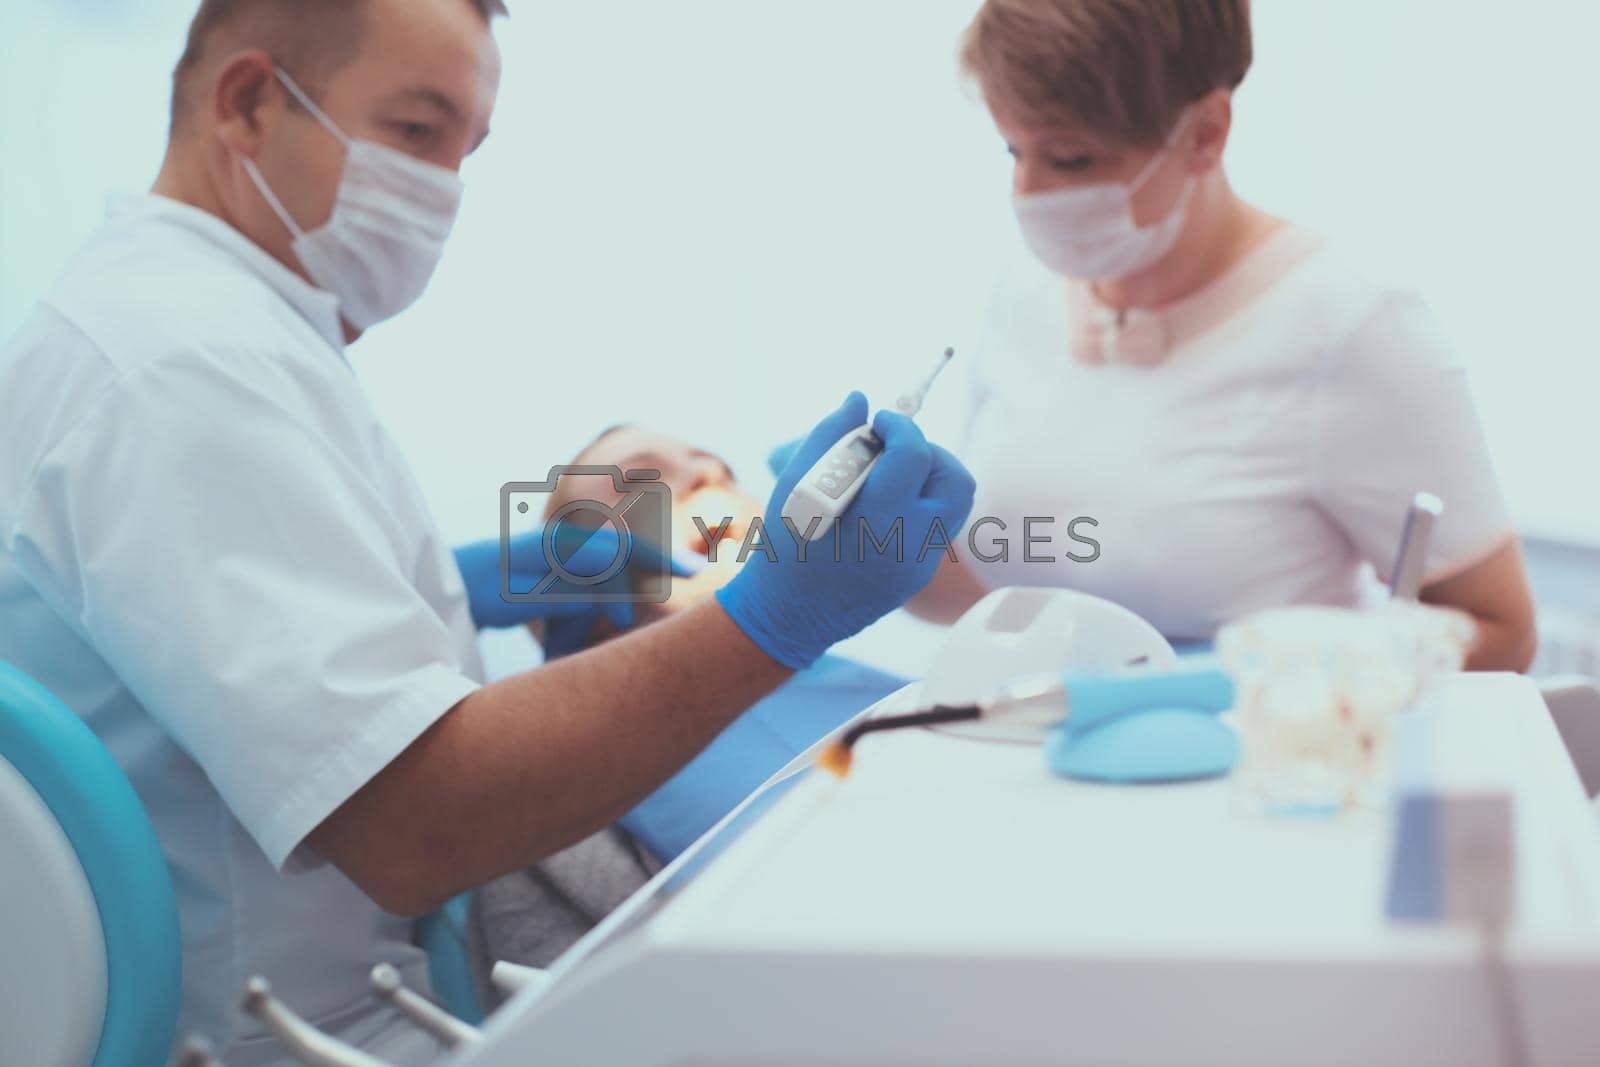 Detail of hand holding dental tools in dental clinic. Dentist Concept.